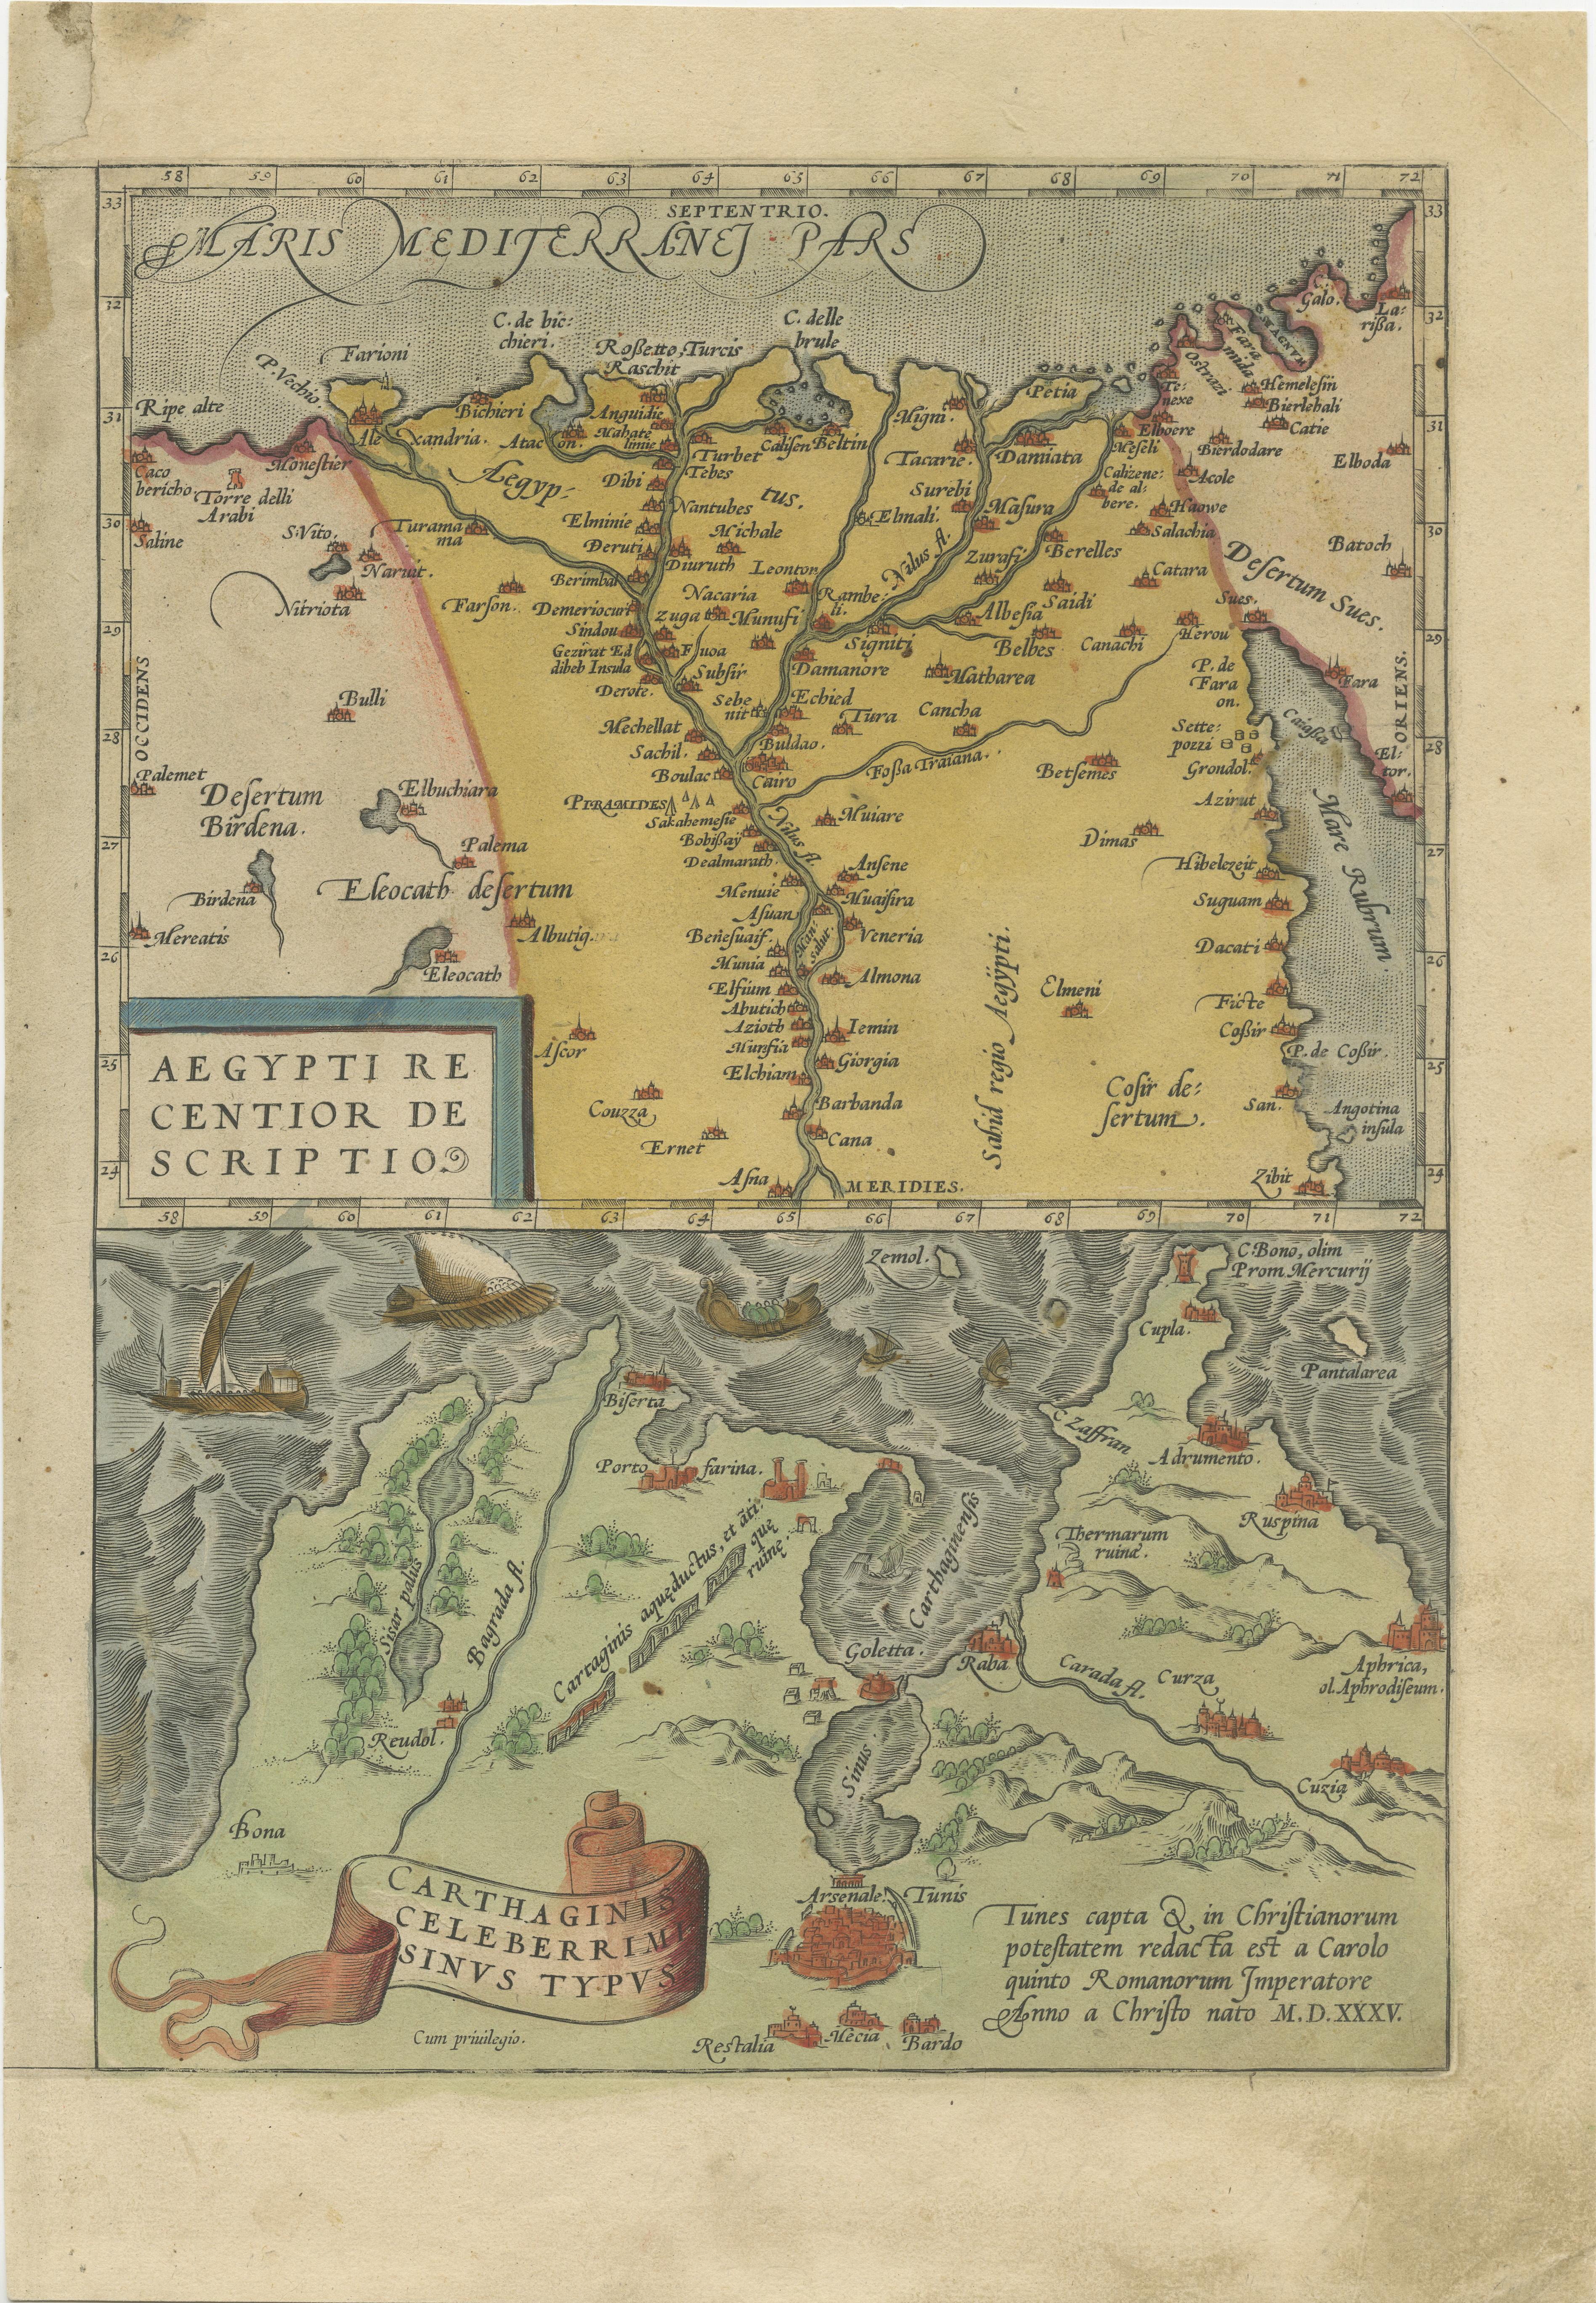 Antique map titled 'Aegypti recentior descriptio - Carthaginis Celeberrimi sinus typus'. Two detailed regional maps by Ortelius. One map shows the region around the Nile, as far as Aswan. The other map shows the environs of the City of Carthage.